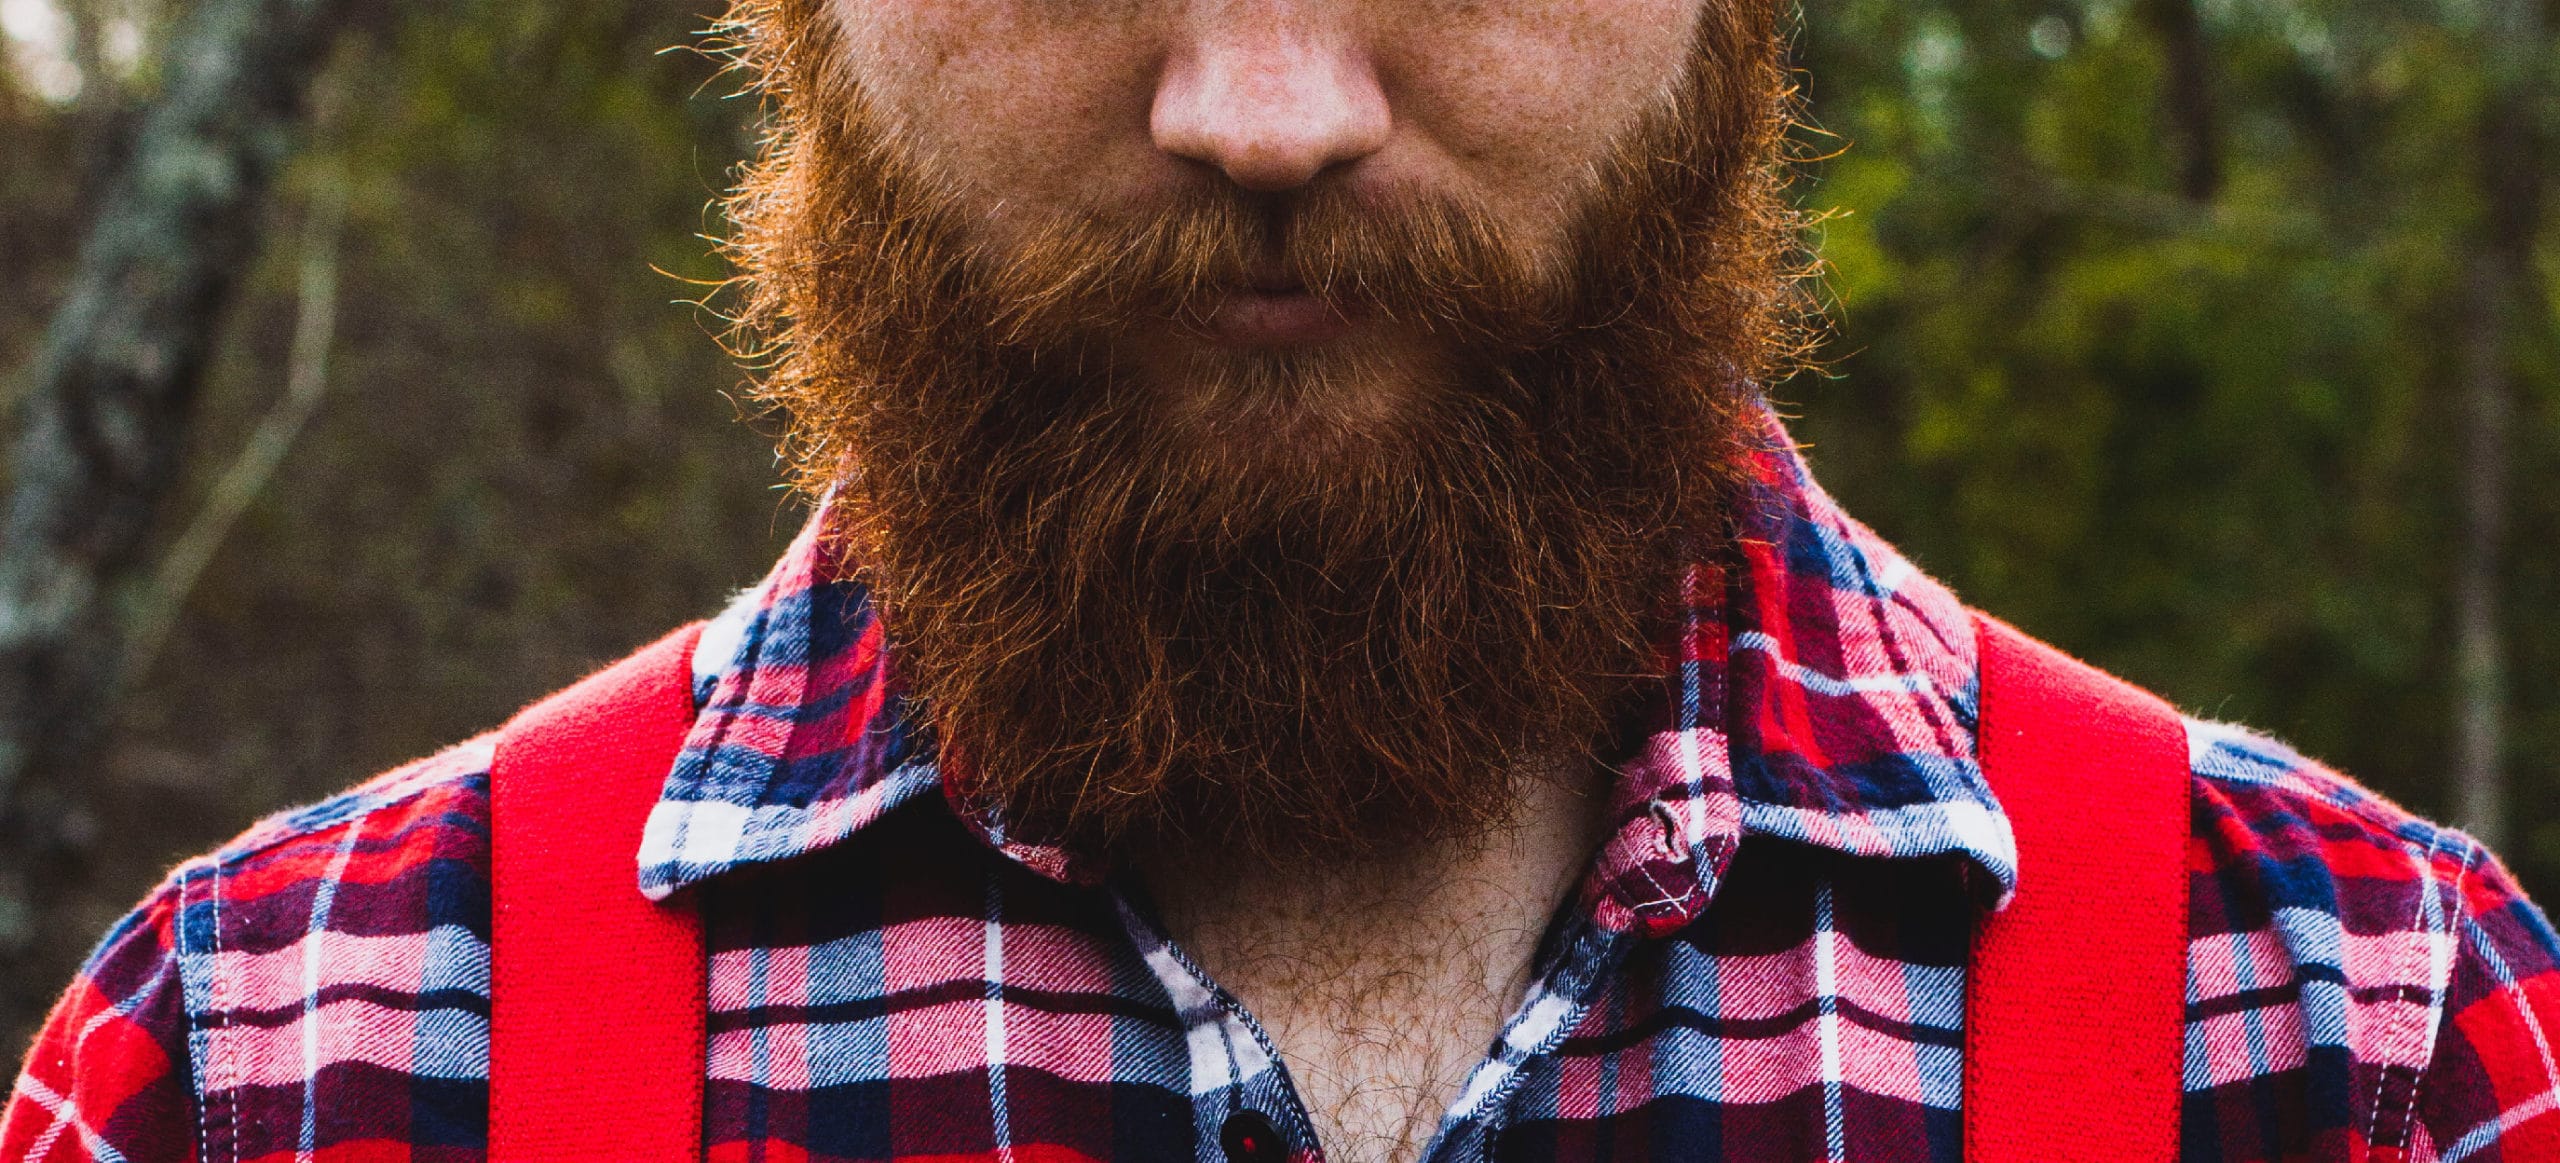 beard shot of man wearing red plaid and overalls